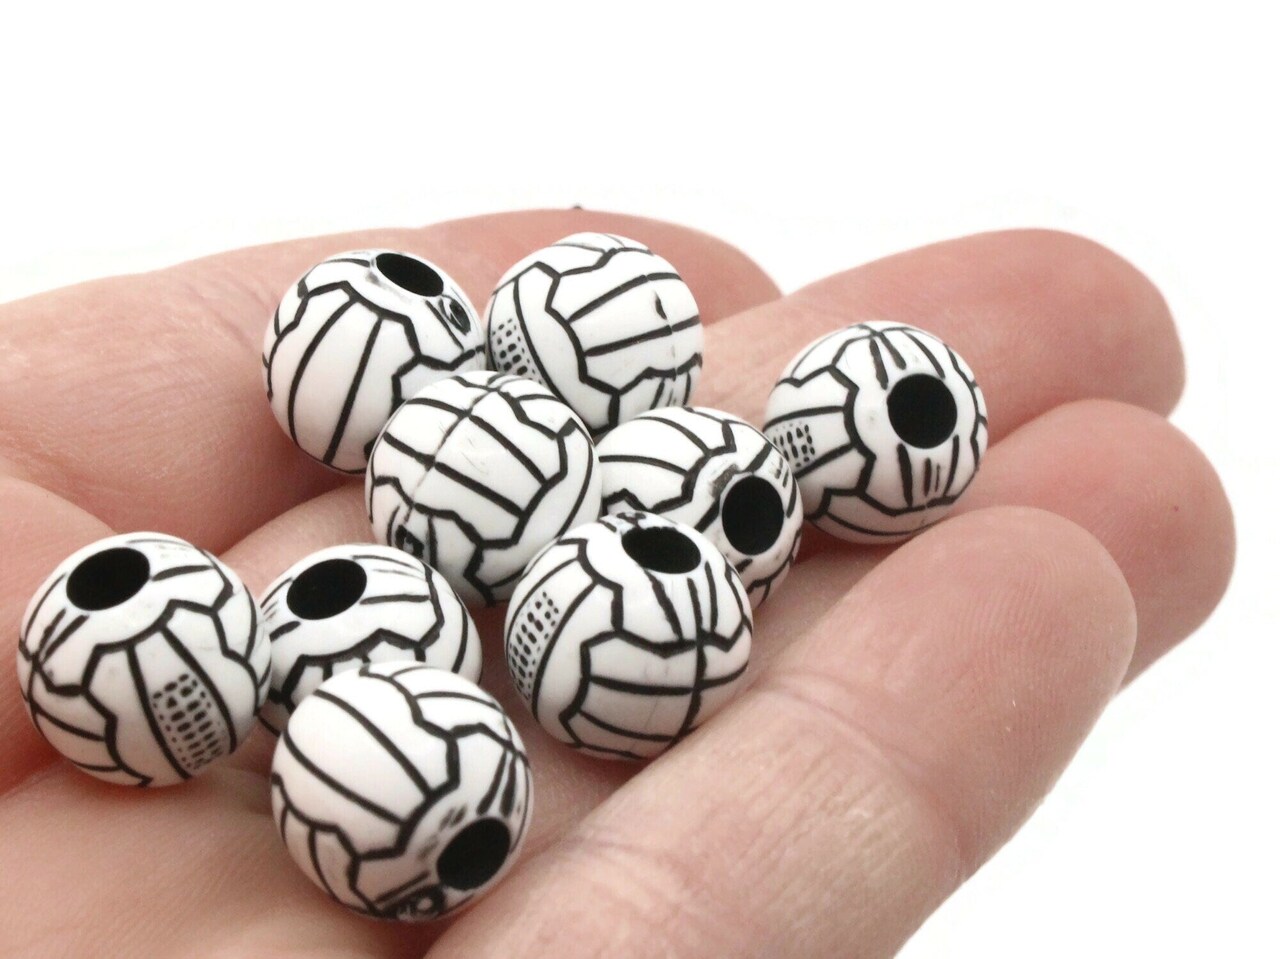 30 11mm Black and White Volleyball Round Plastic Sports Beads